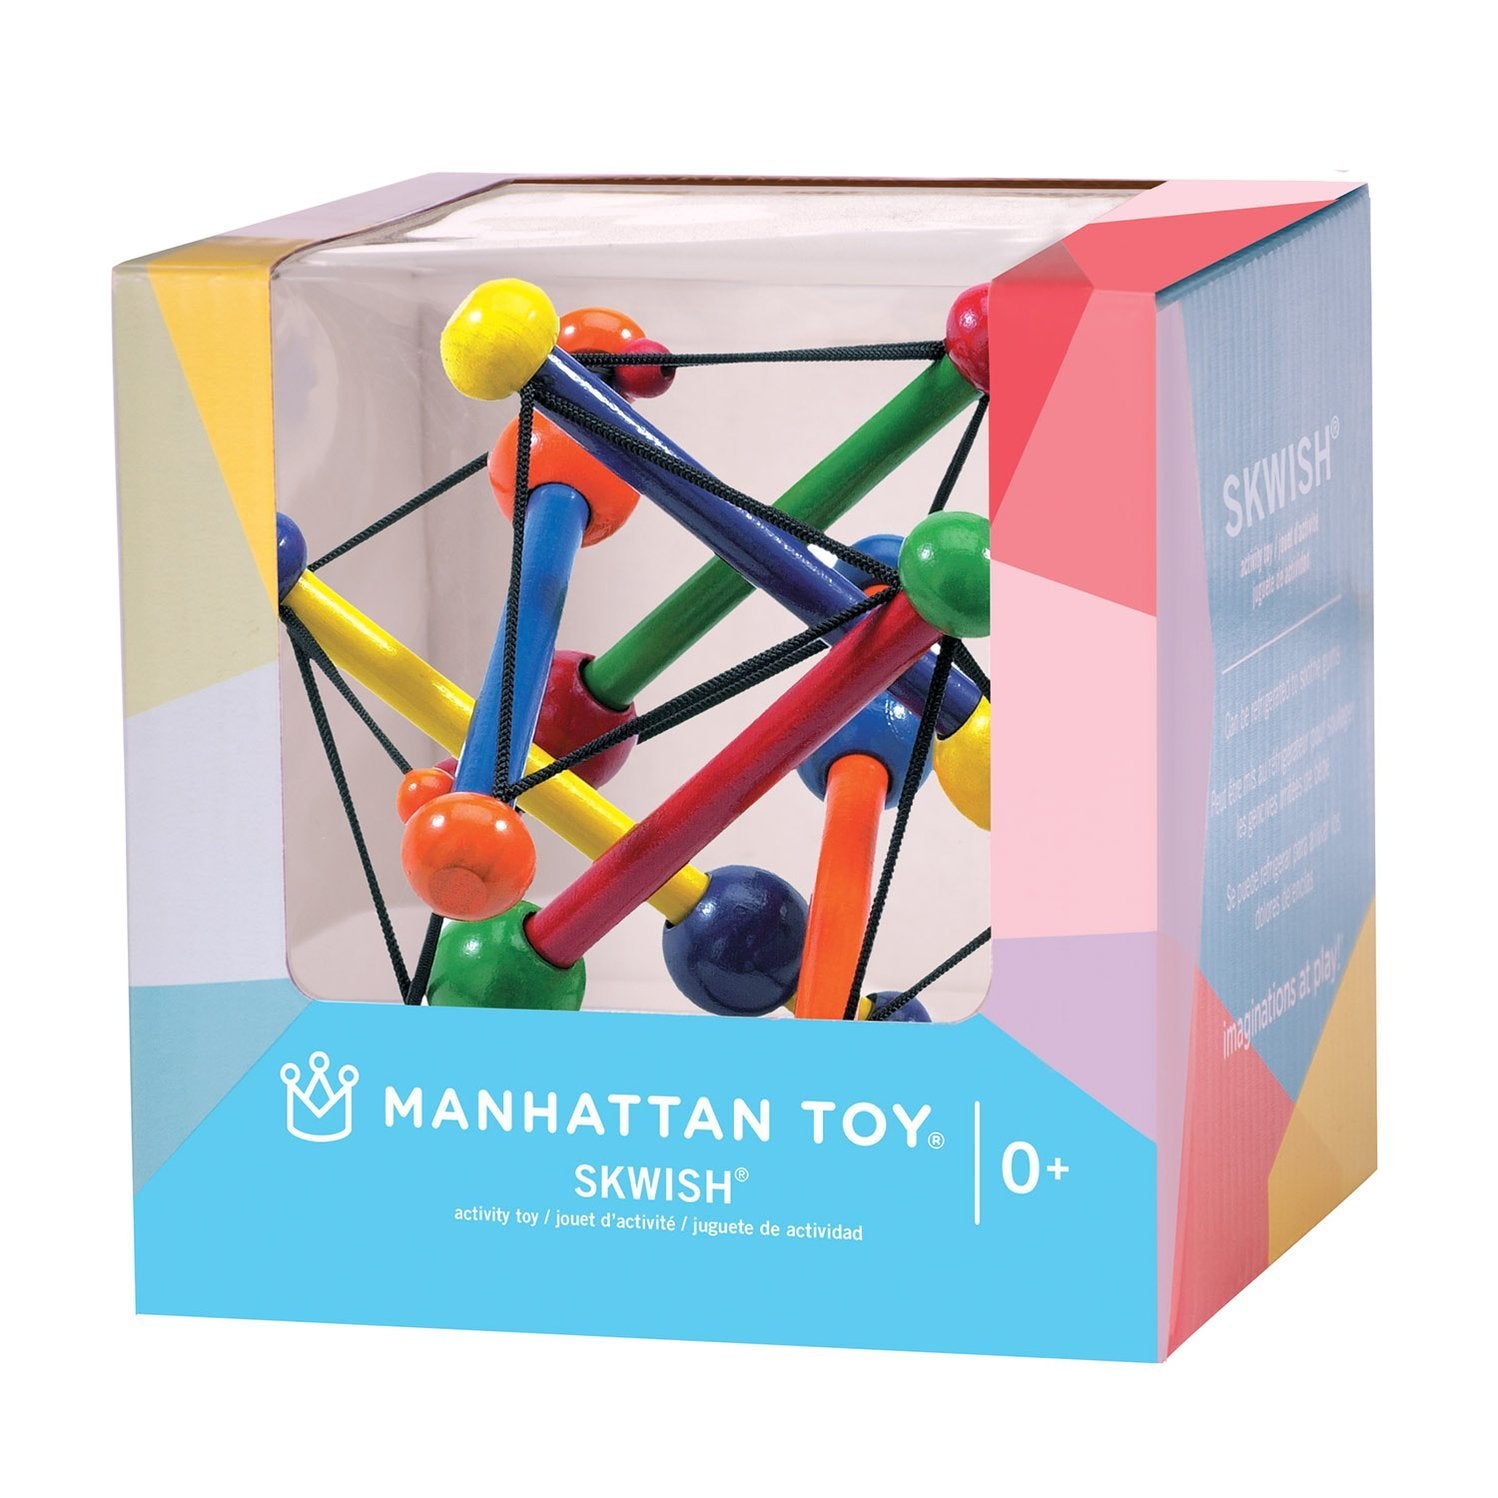 Rattles And Teethers Manhattan Toy Skwish Classic 4 ?v=1588344487